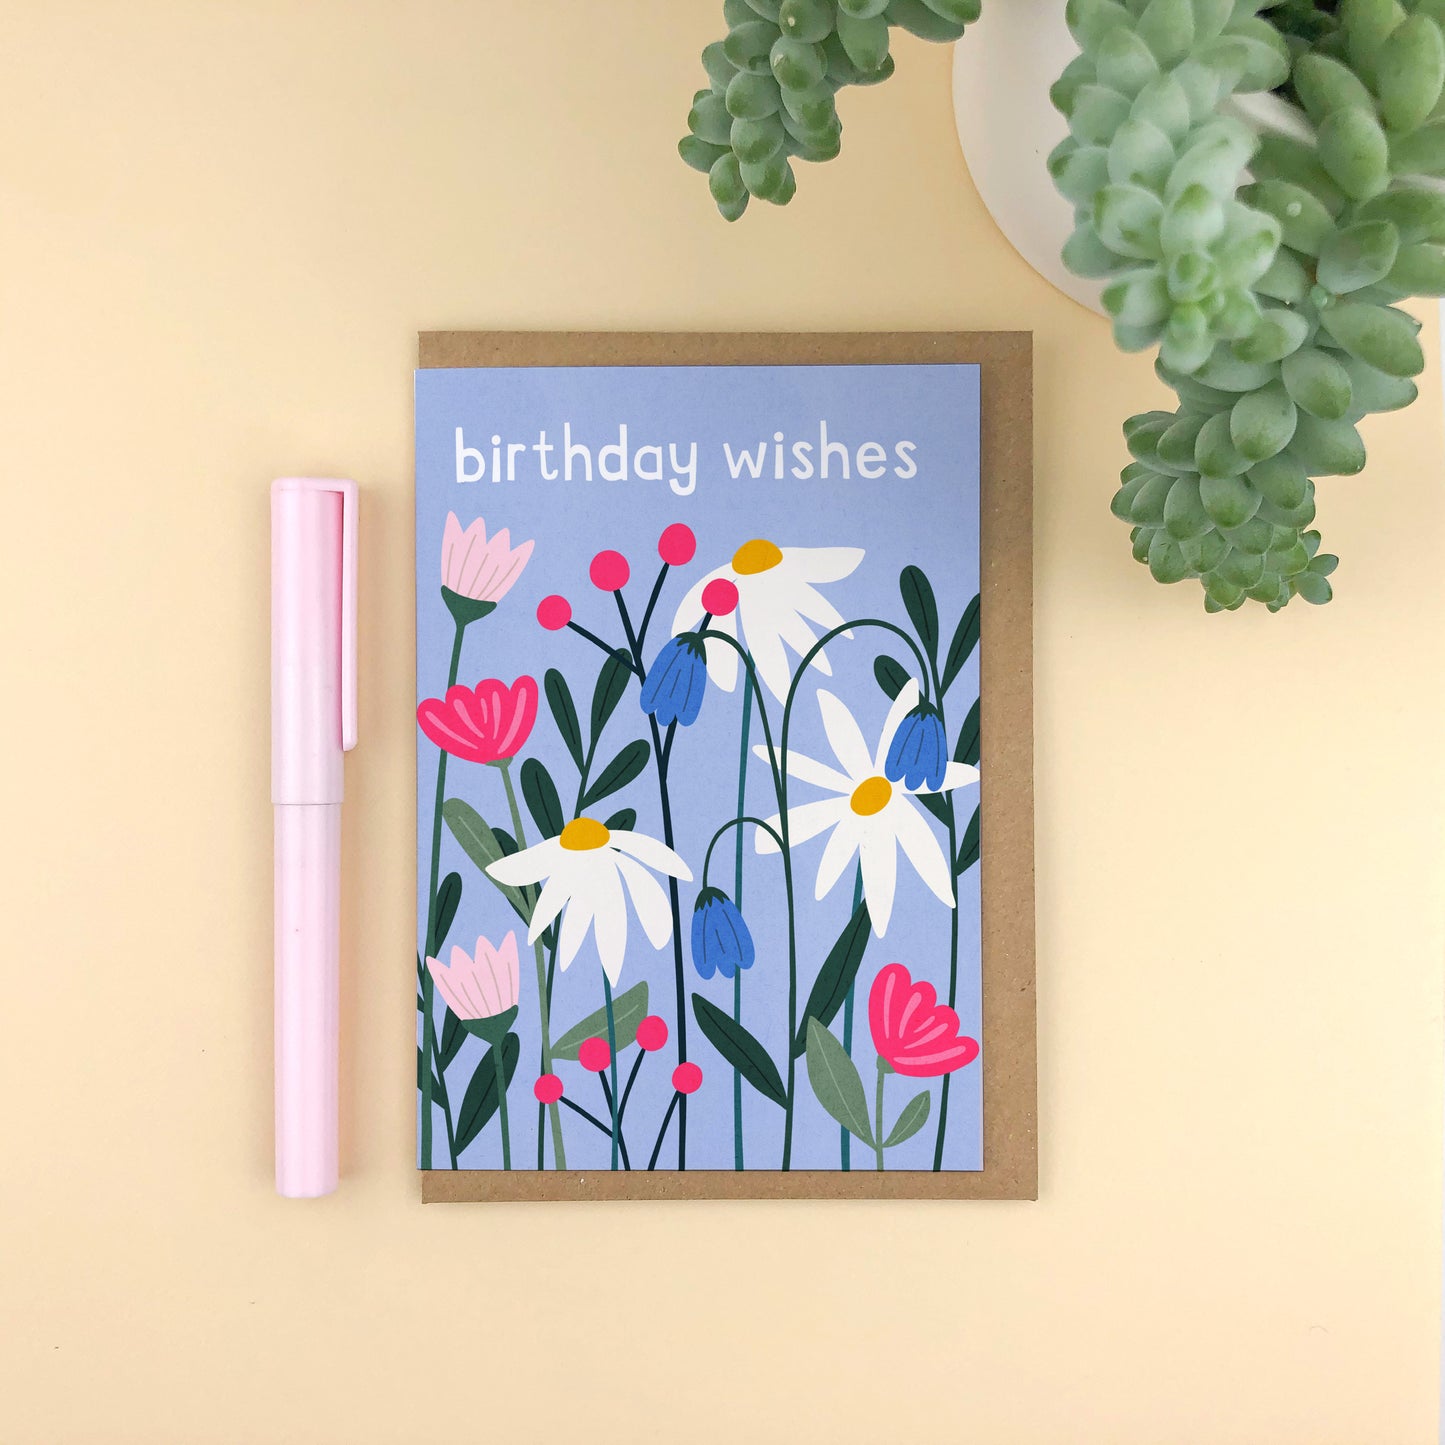 Birthday Wishes Floral Stems Card